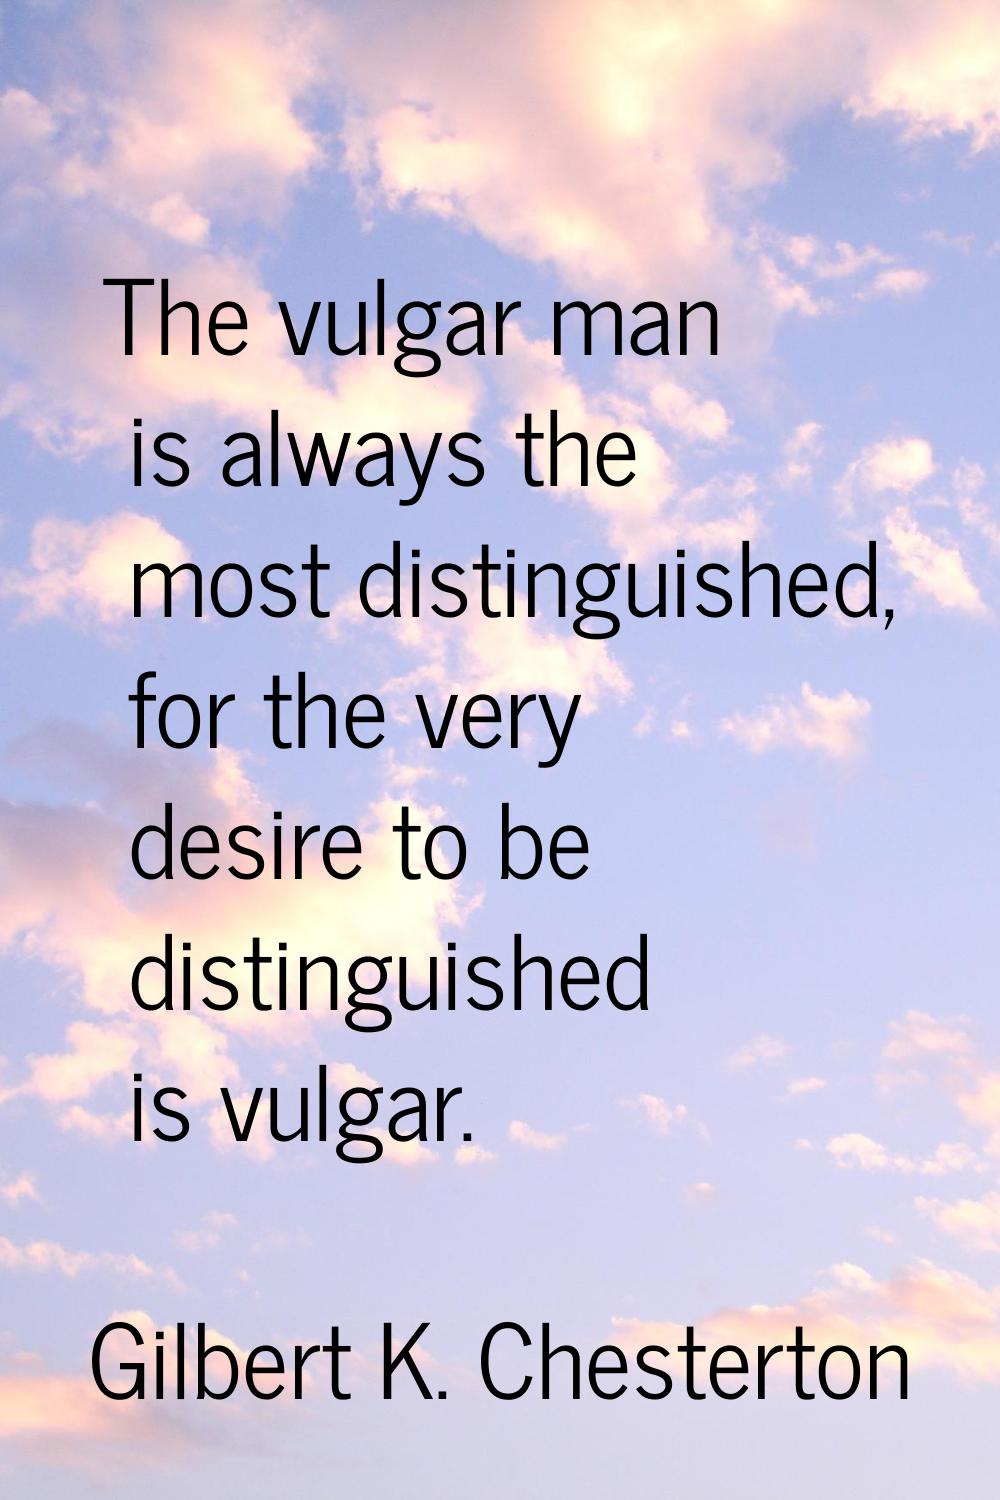 The vulgar man is always the most distinguished, for the very desire to be distinguished is vulgar.